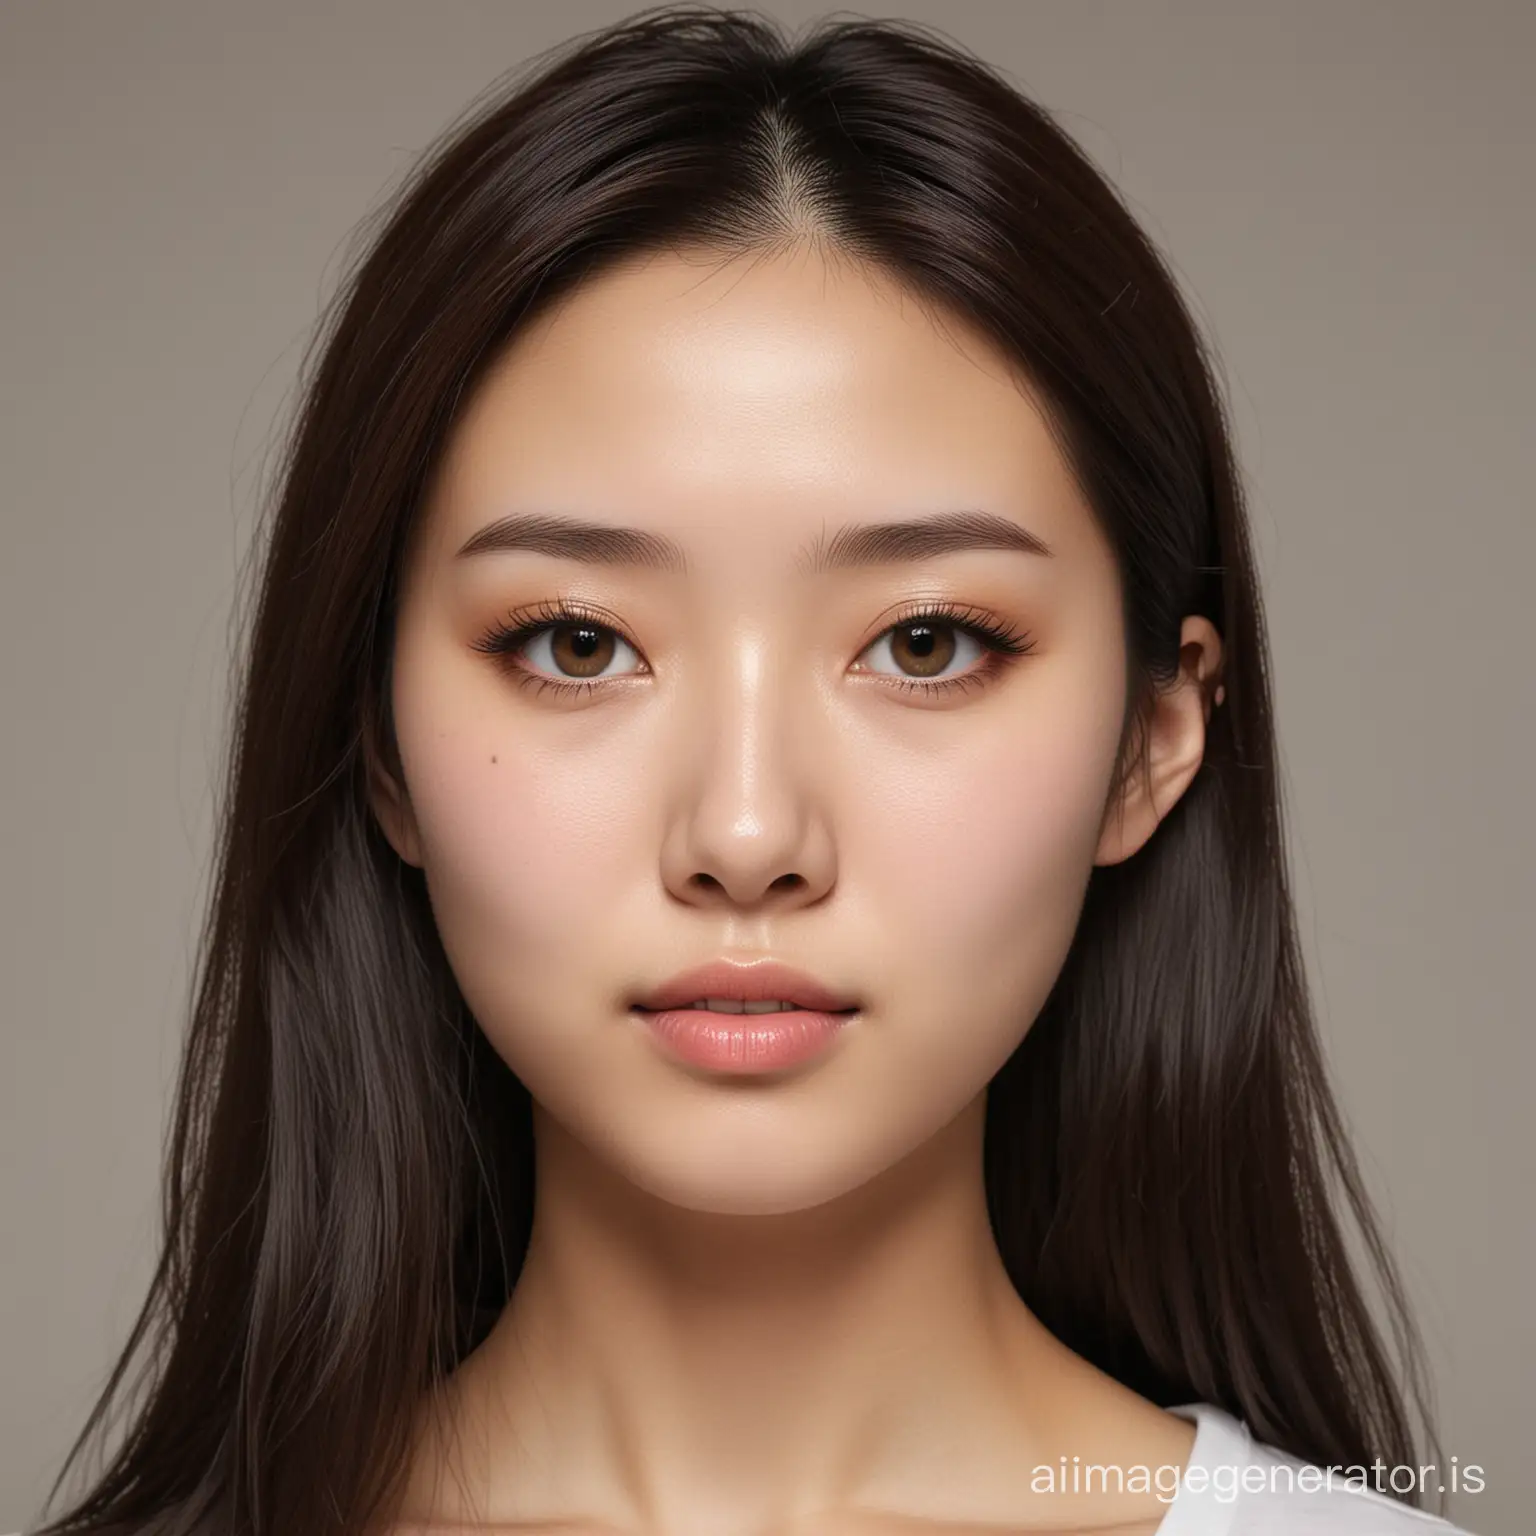 Realistic-Portrait-of-Chinese-Female-College-Student-with-AlmondShaped-Eyes